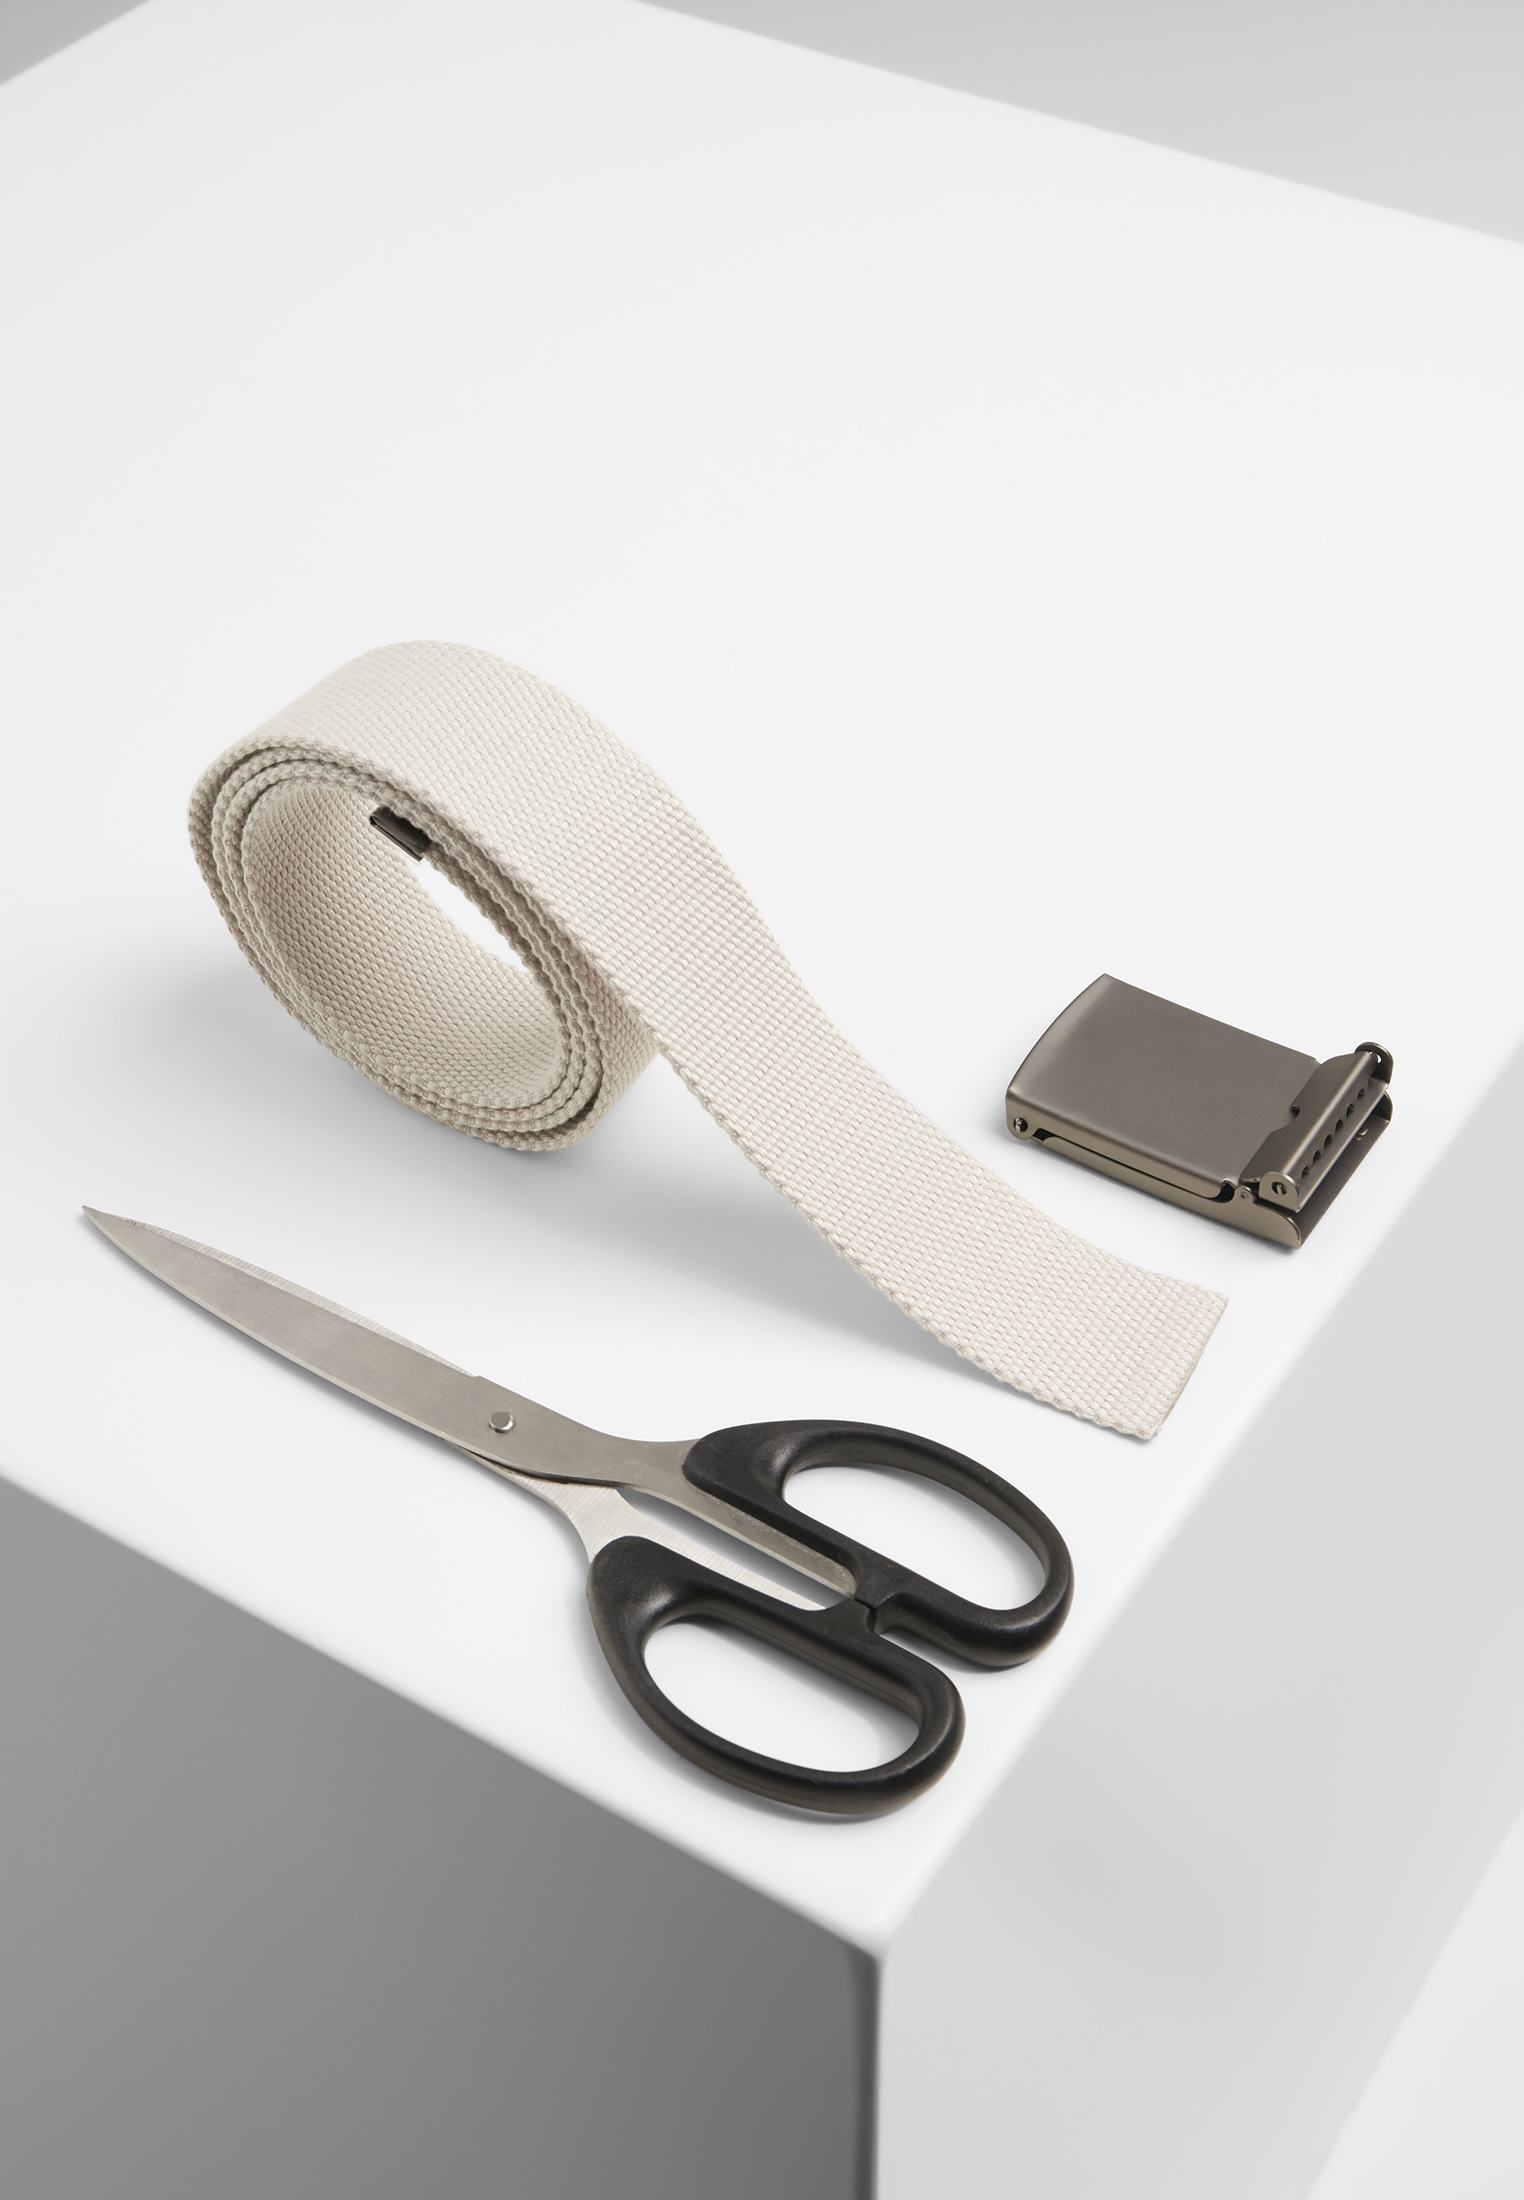 G?rtel Canvas Belts in Farbe sand